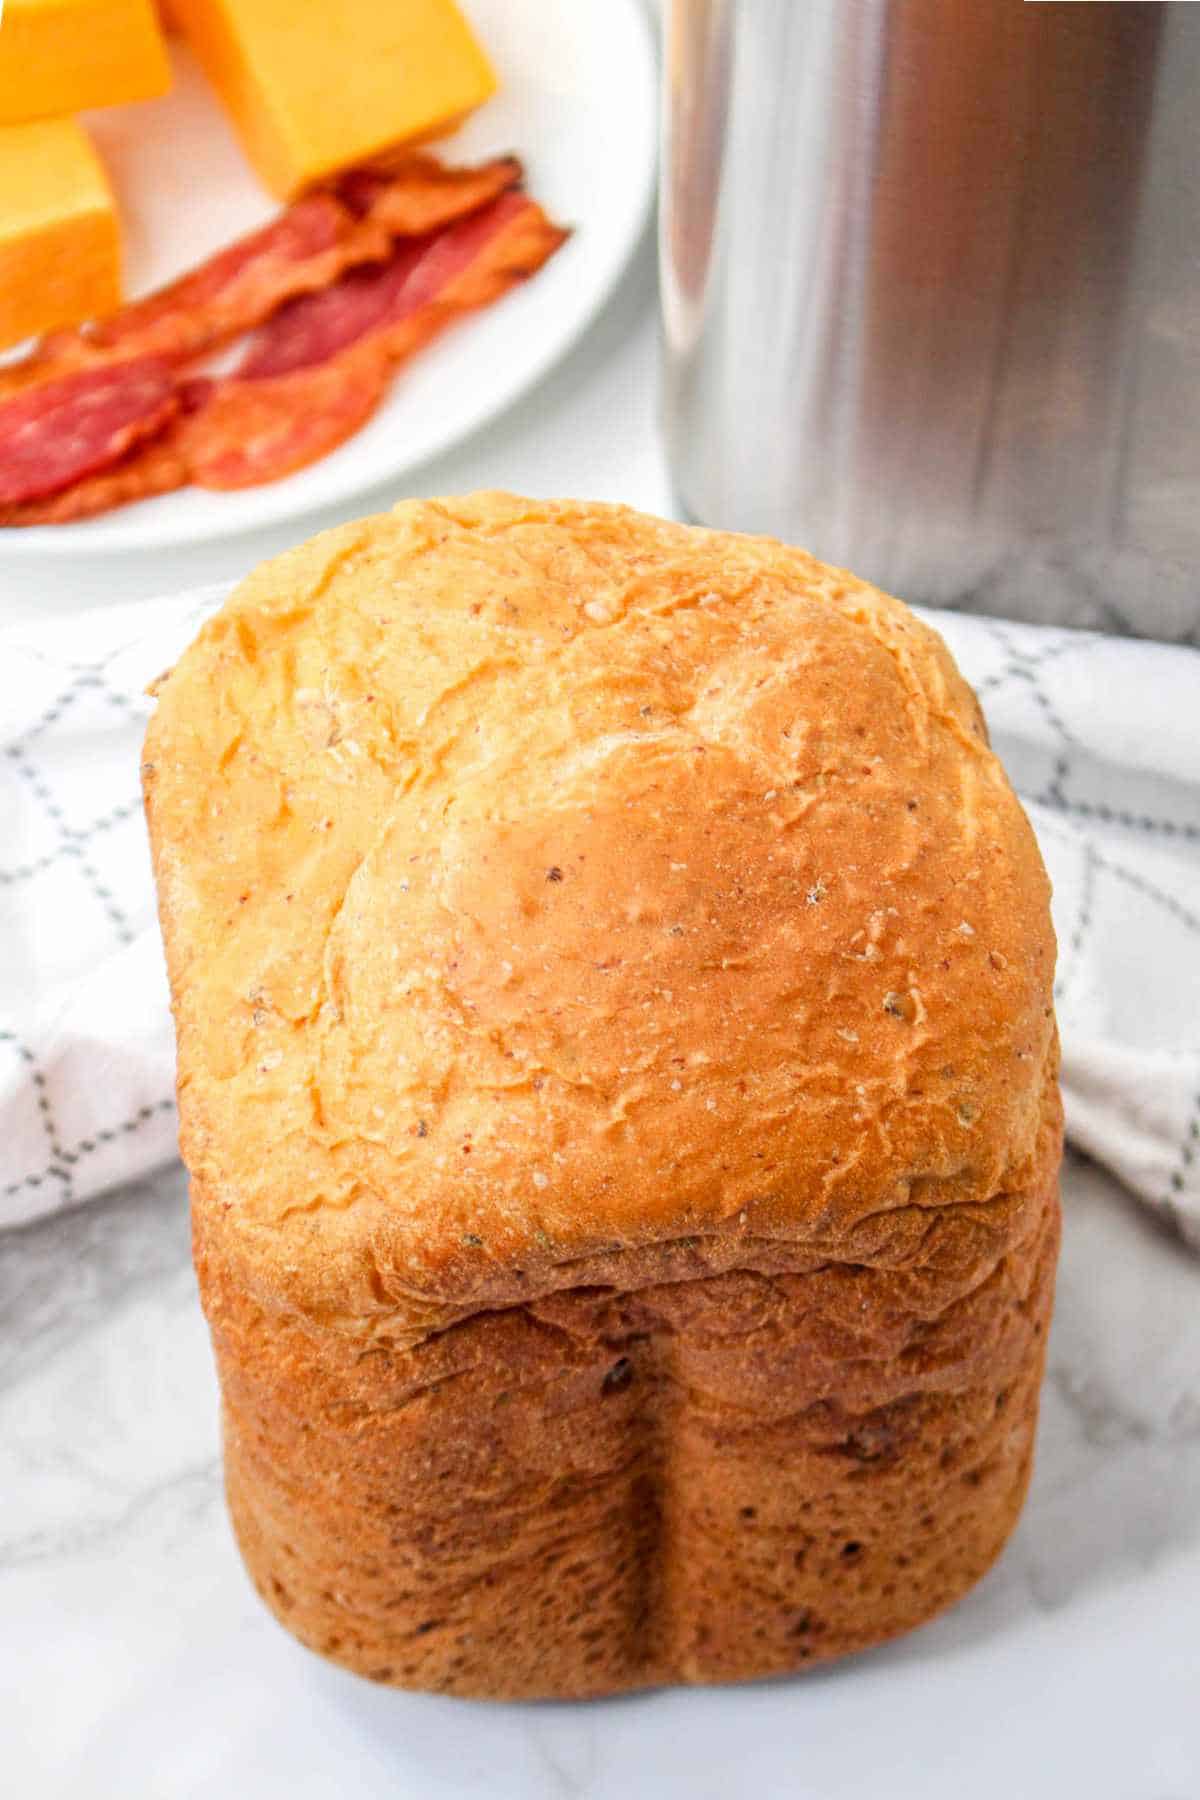 Fresh baked loaf of cheese bread.